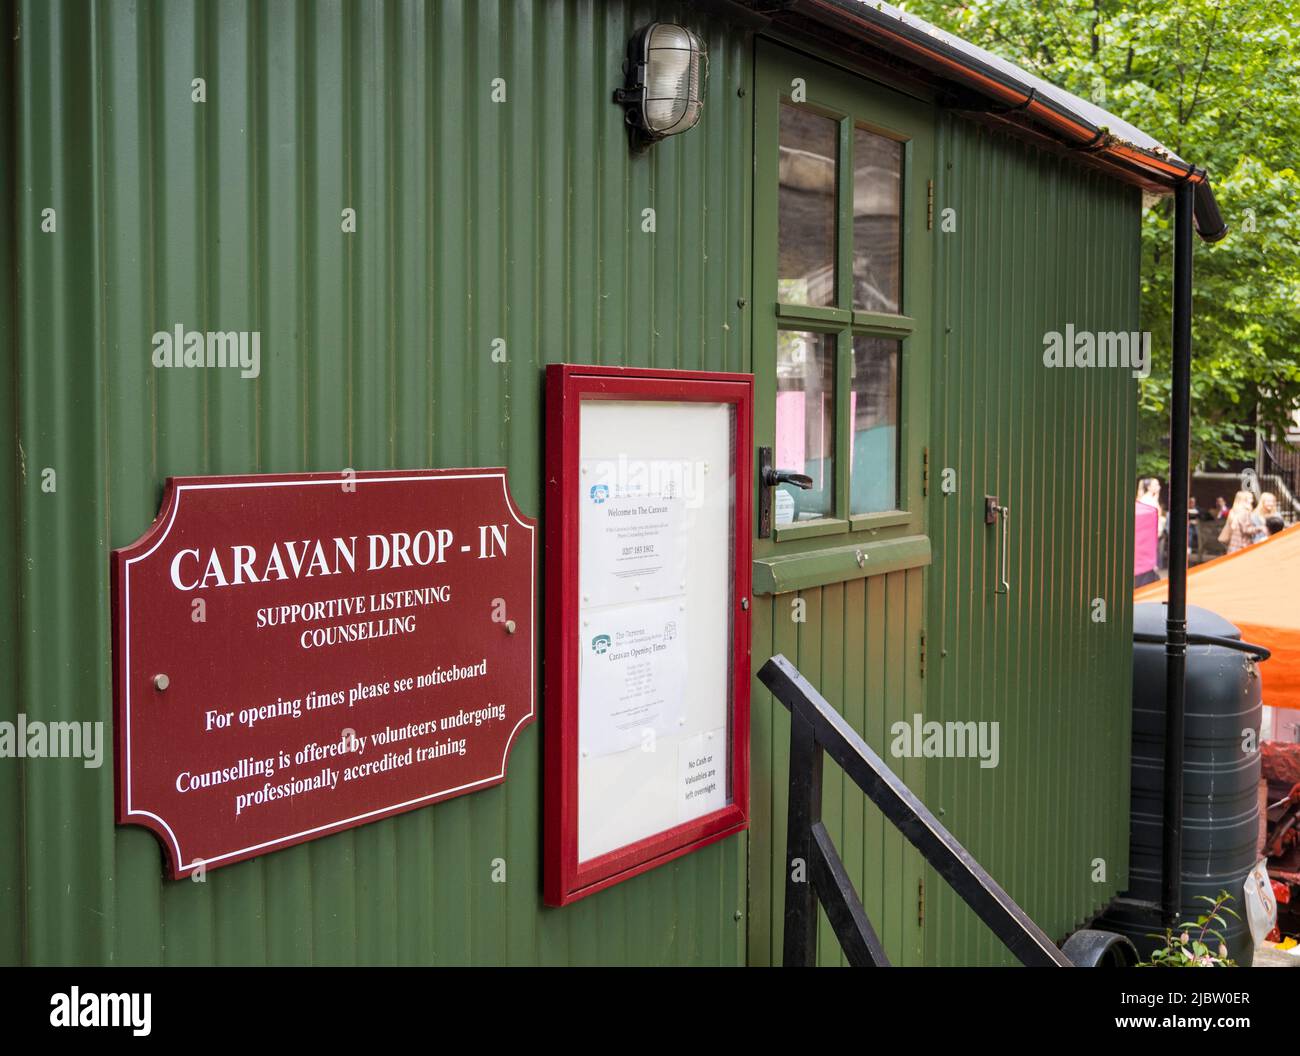 The Caravan Drop-In, Counselling Caravan, St James Church, Piccadilly, London, England, UK, GB. Stock Photo